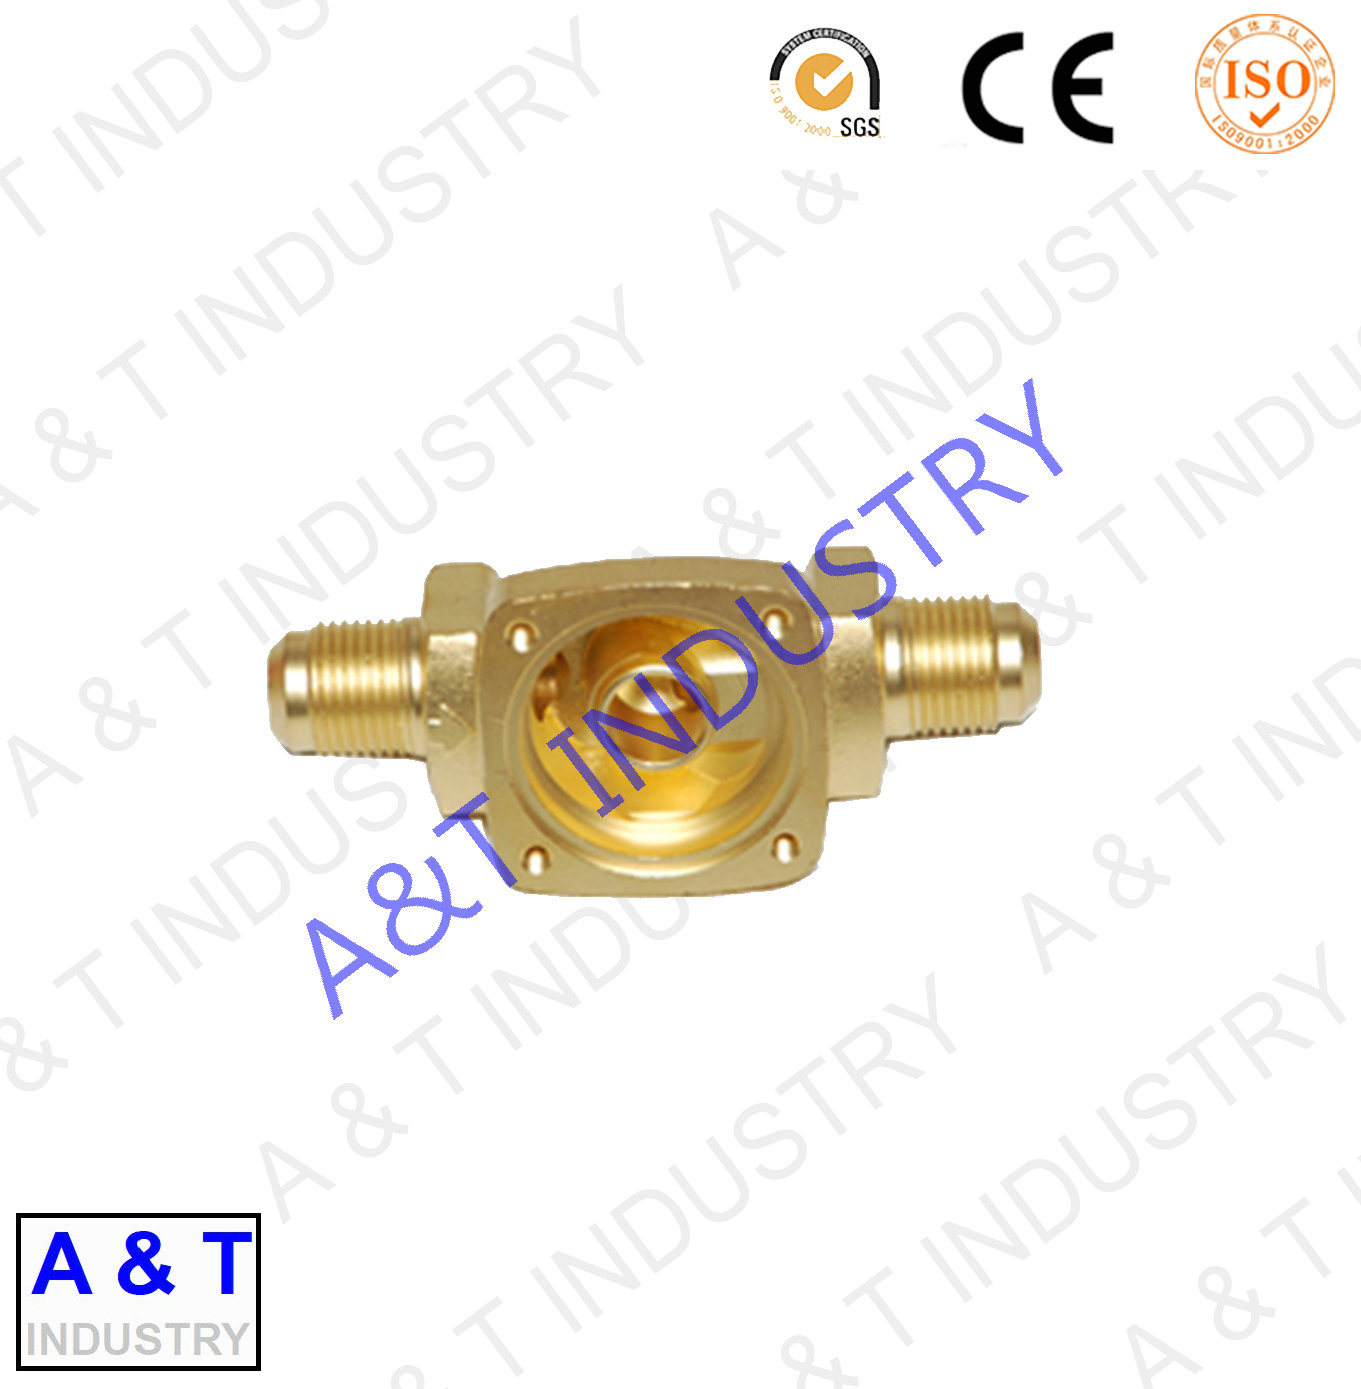 at High Quality Forged Brass Parts